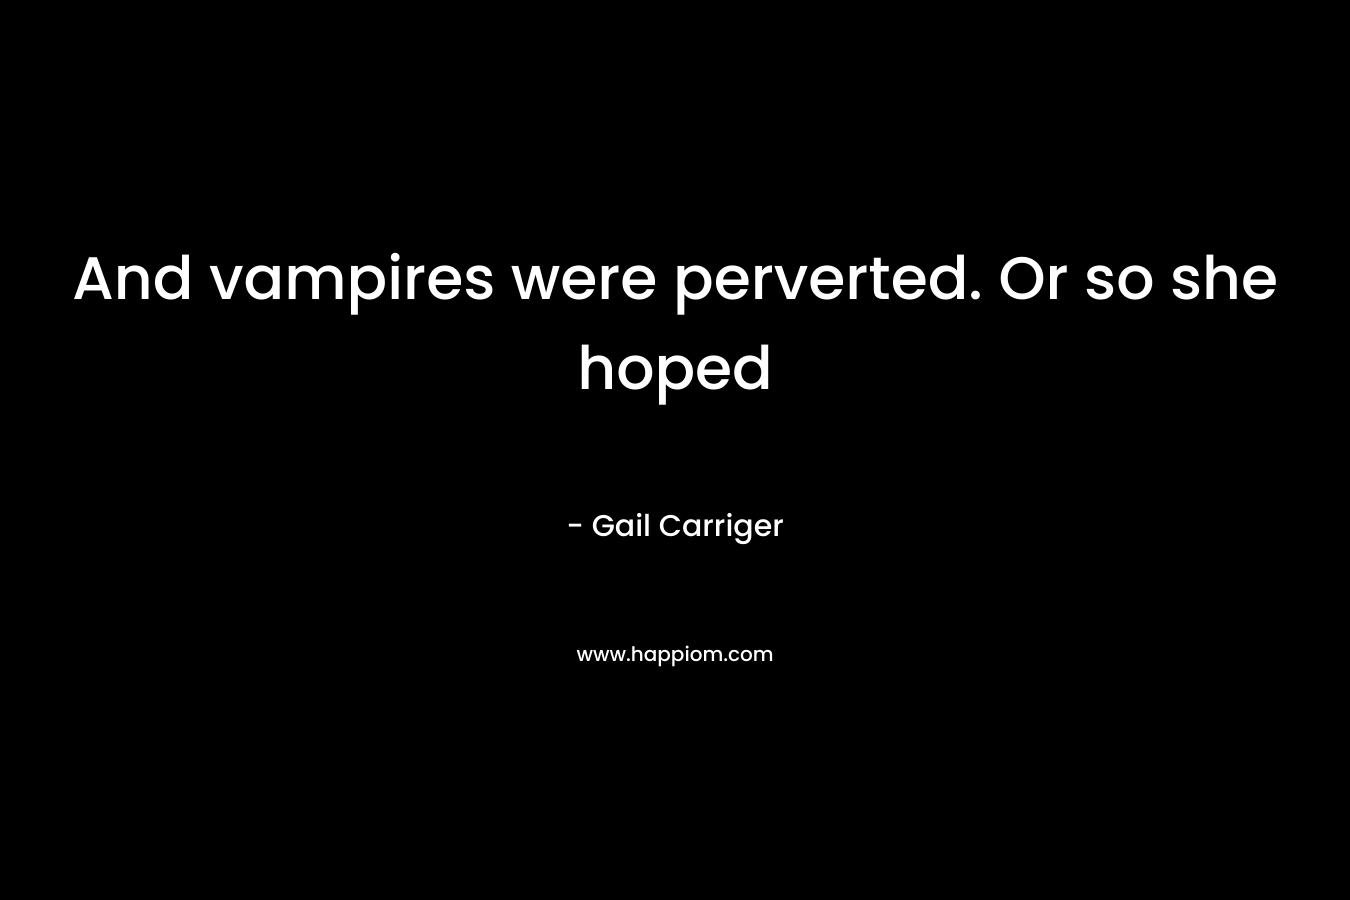 And vampires were perverted. Or so she hoped – Gail Carriger